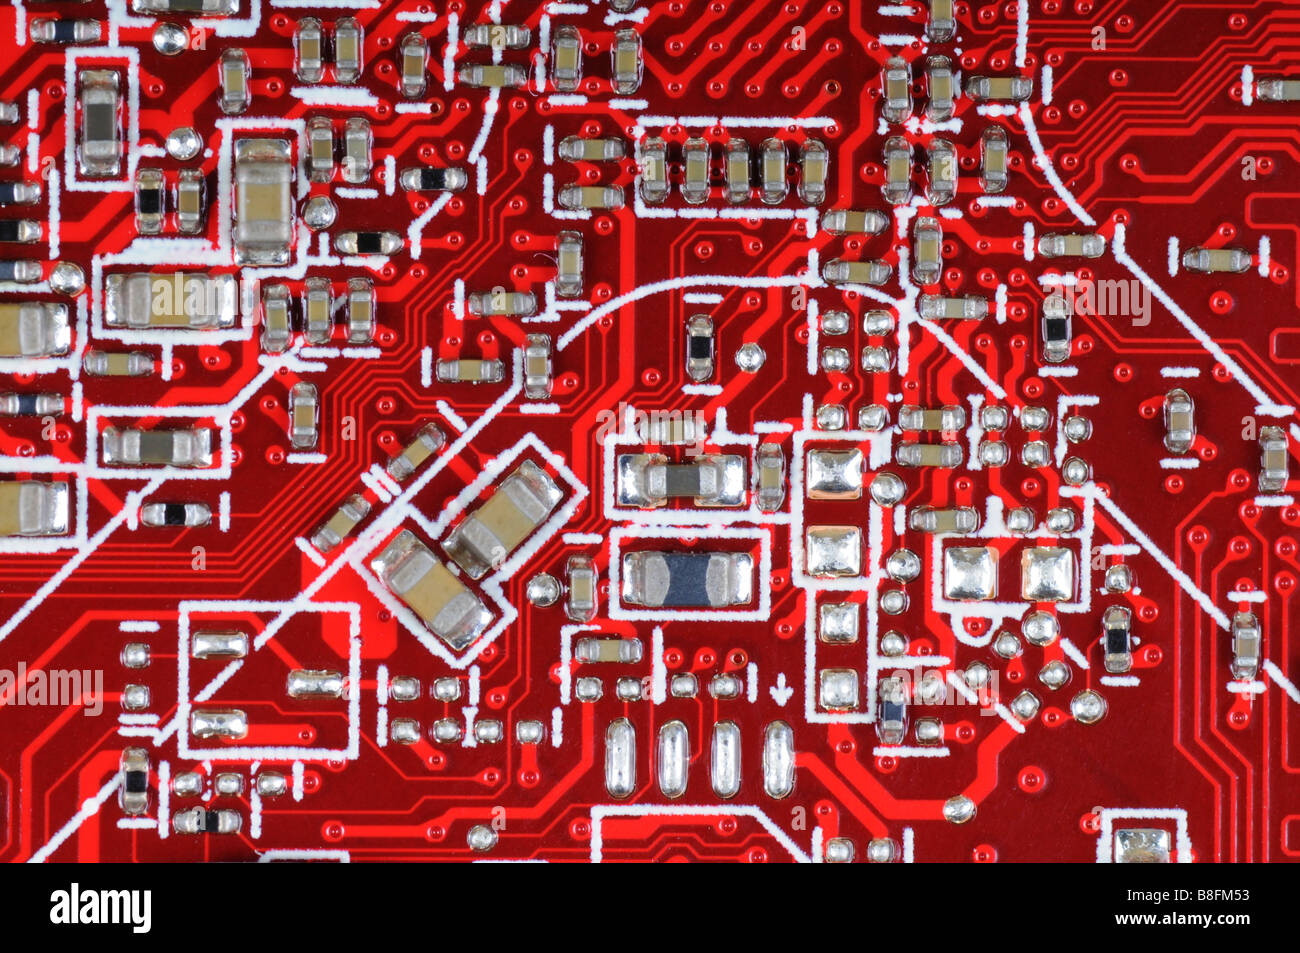 Detail of red printed circuit board with electronic components. Stock Photo